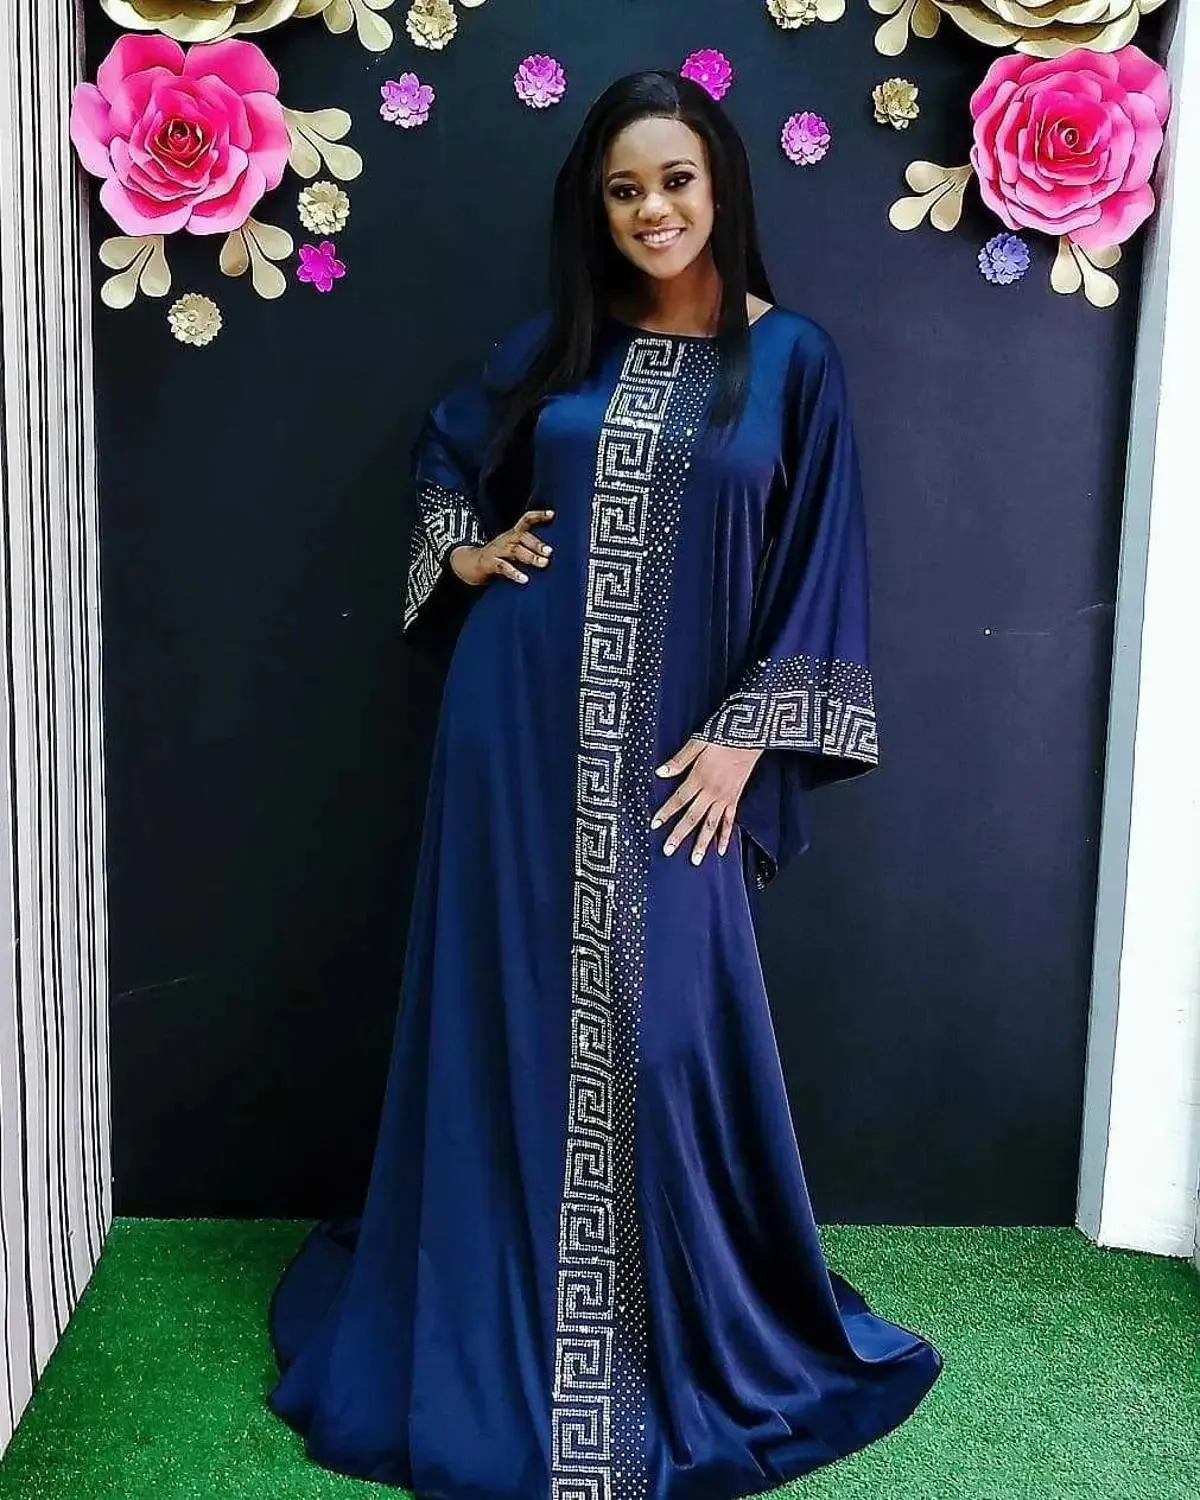 African Dresses For Women Autumn Lady Clothing Diamonds Femme Robe Long Sleeve Maxi High Quality Muslim Dress 240109